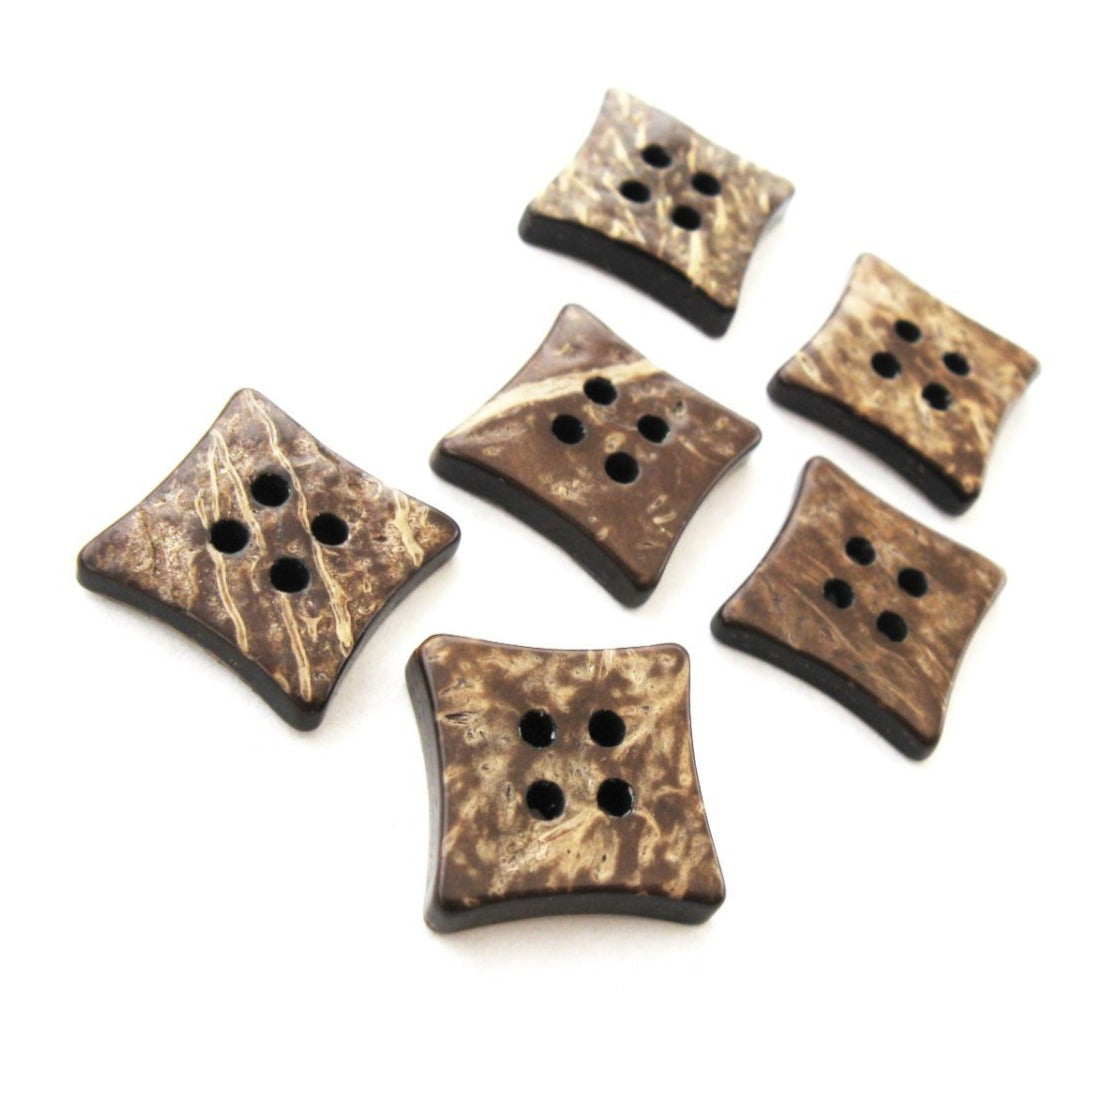 6 Brown Coconut Shell Buttons 14mm -  Square shape